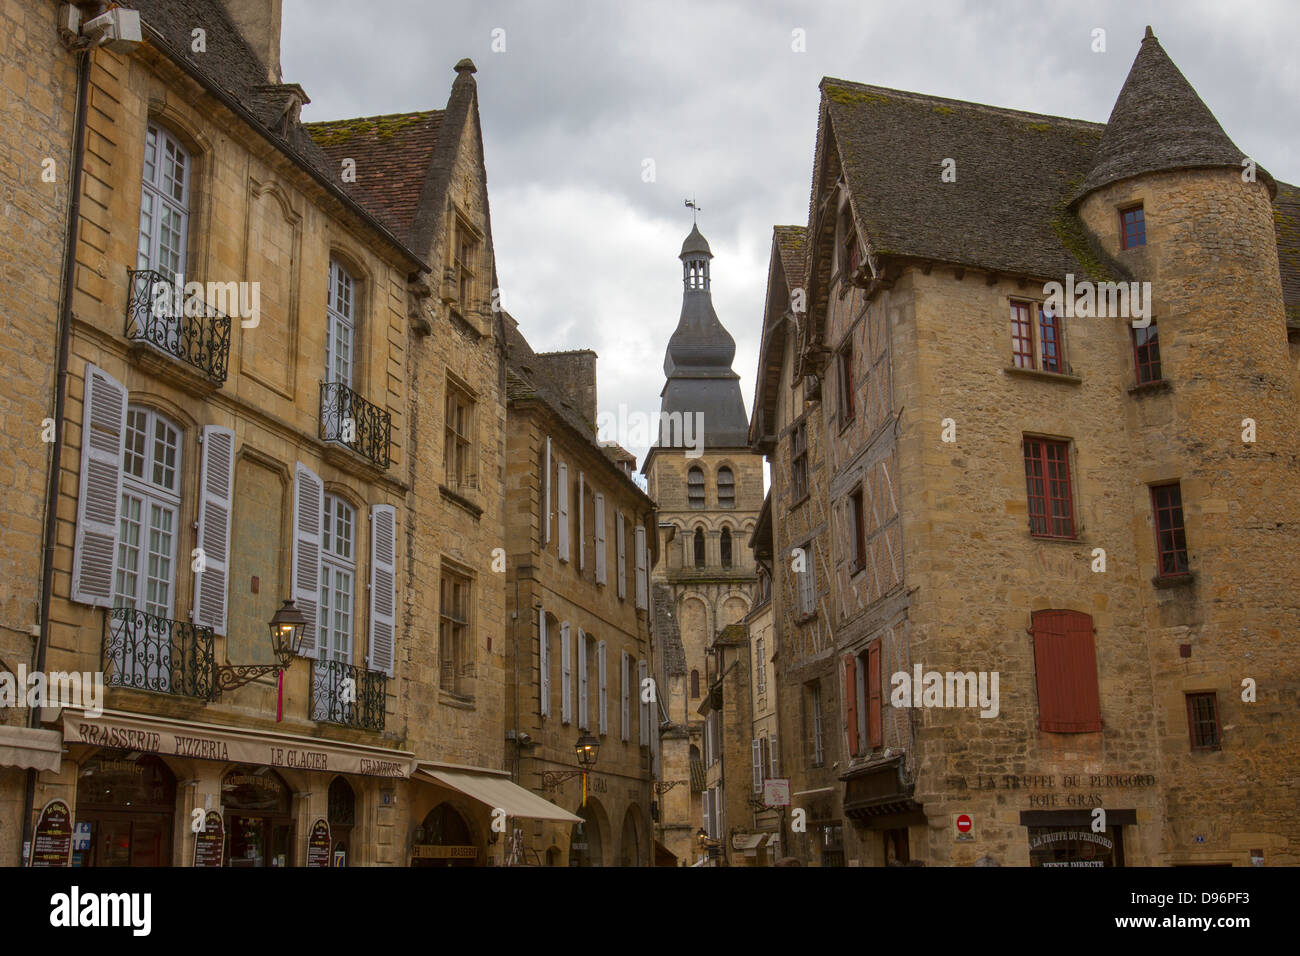 Beautiful medieval sandstone buildings and bell tower of Saint-Sacerdos Cathedral in charming Sarlat, Dordogne region of France Stock Photo